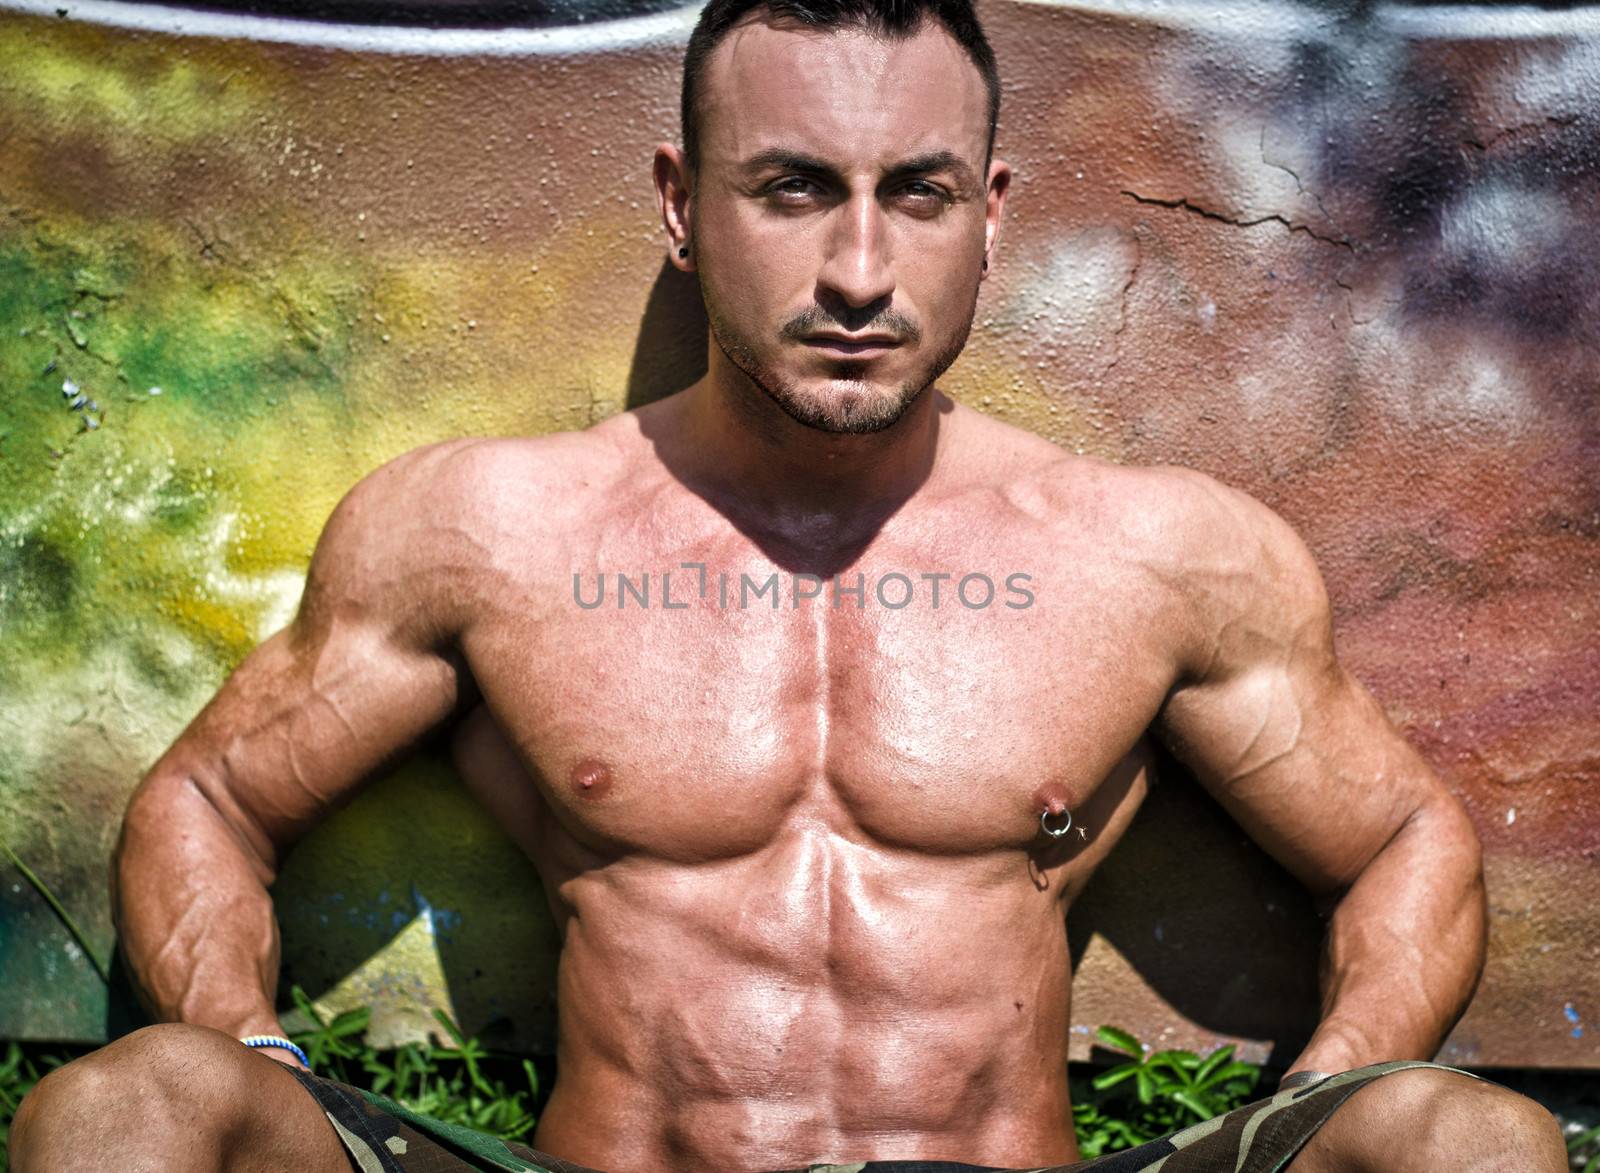 Muscular bodybuilder sitting against colorful wall showing ripped pecs and abs